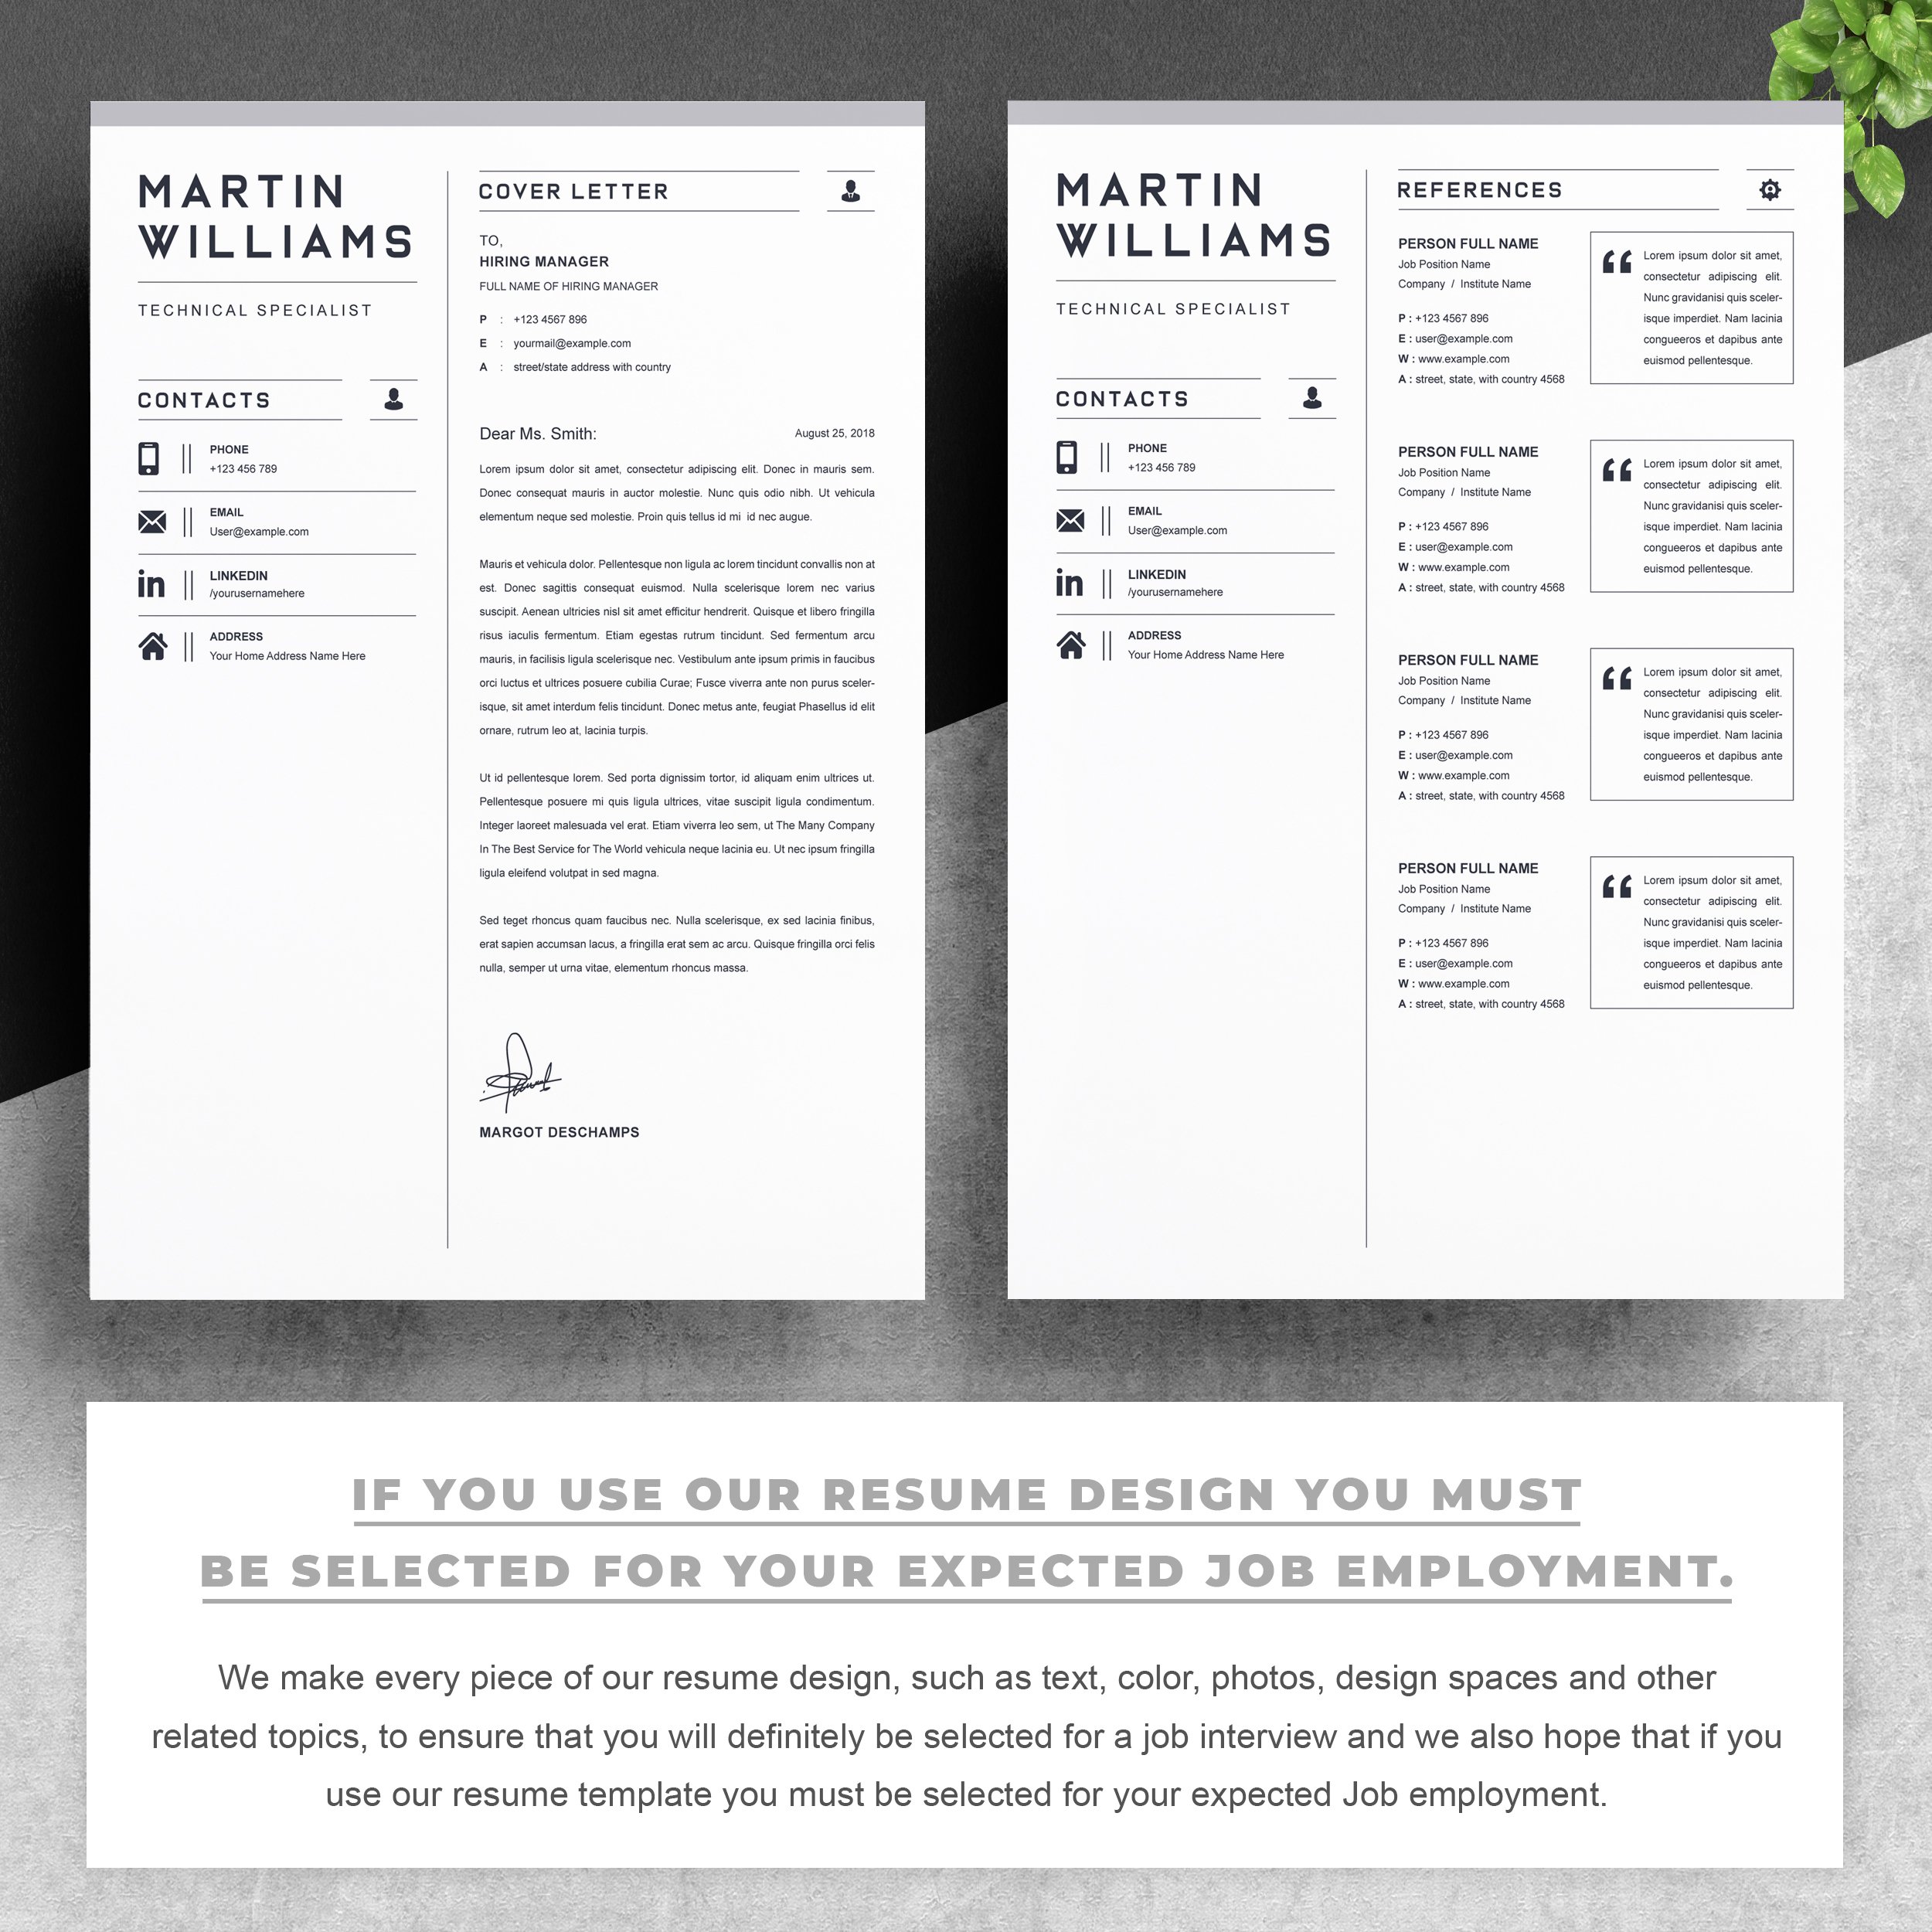 03 2 pages free resume design template copy 226